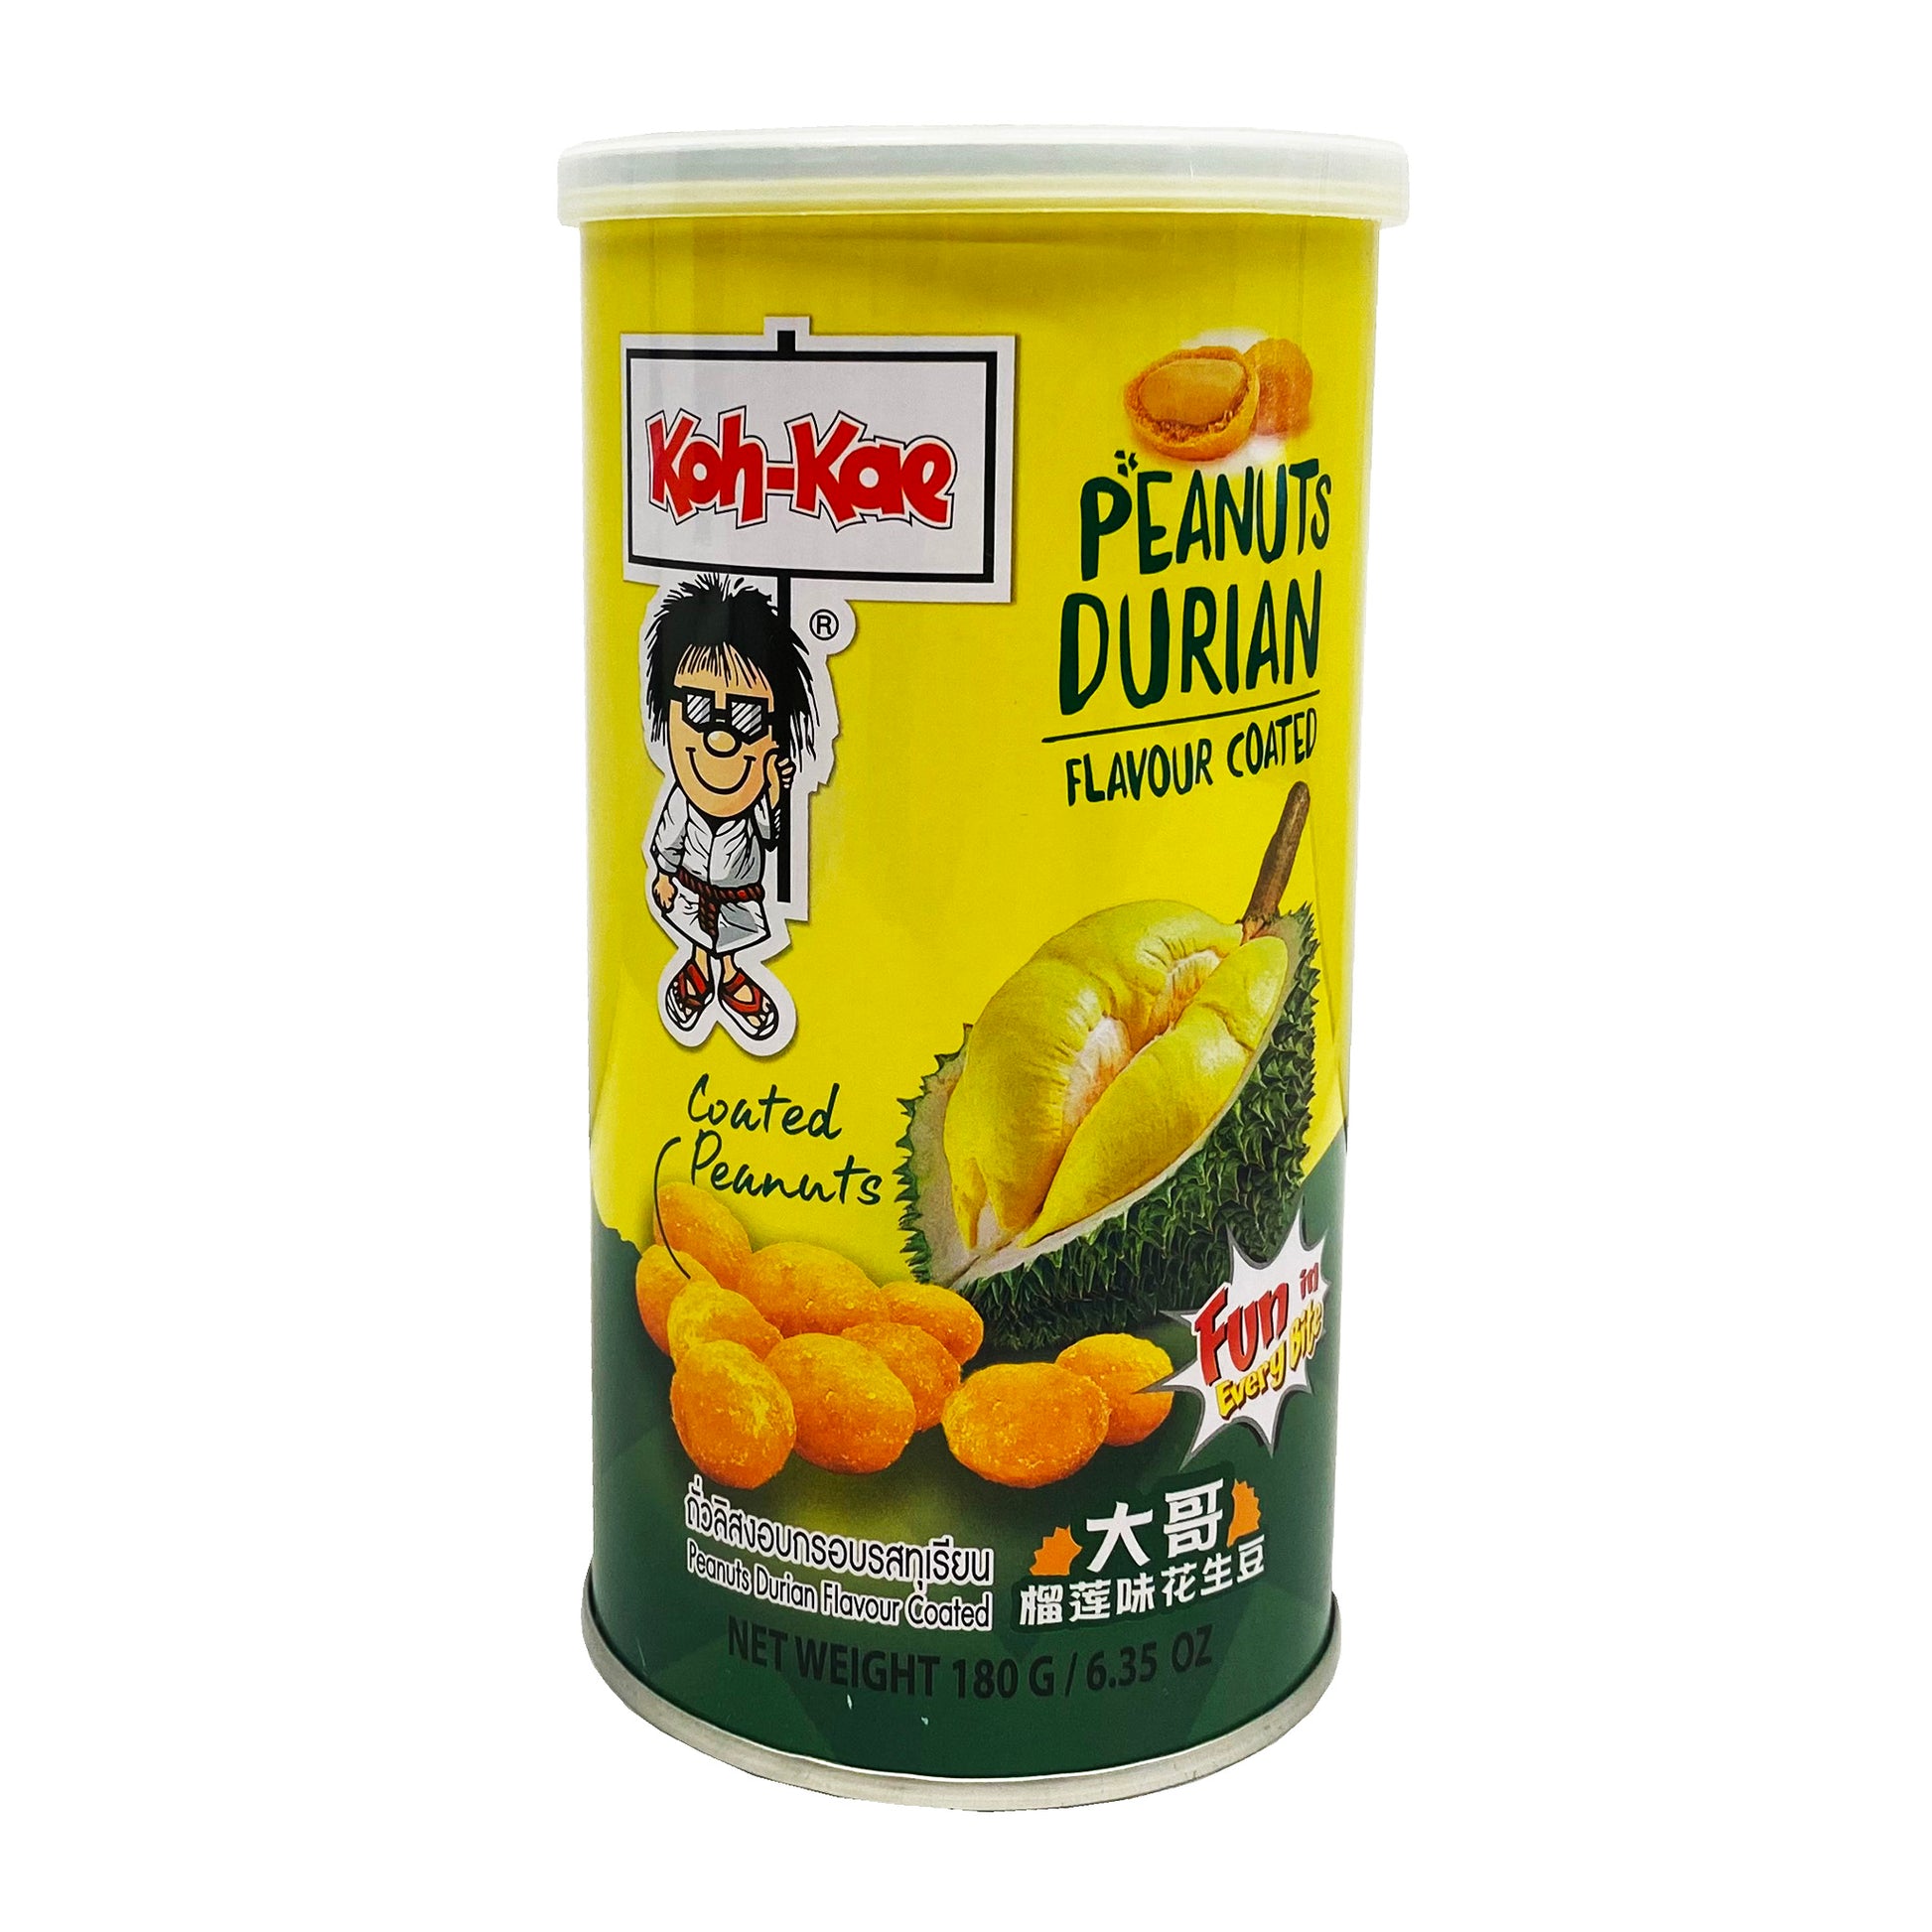 Front graphic image of Koh-Kae Durian Flavor Coated Peanuts 6.35oz (180g)